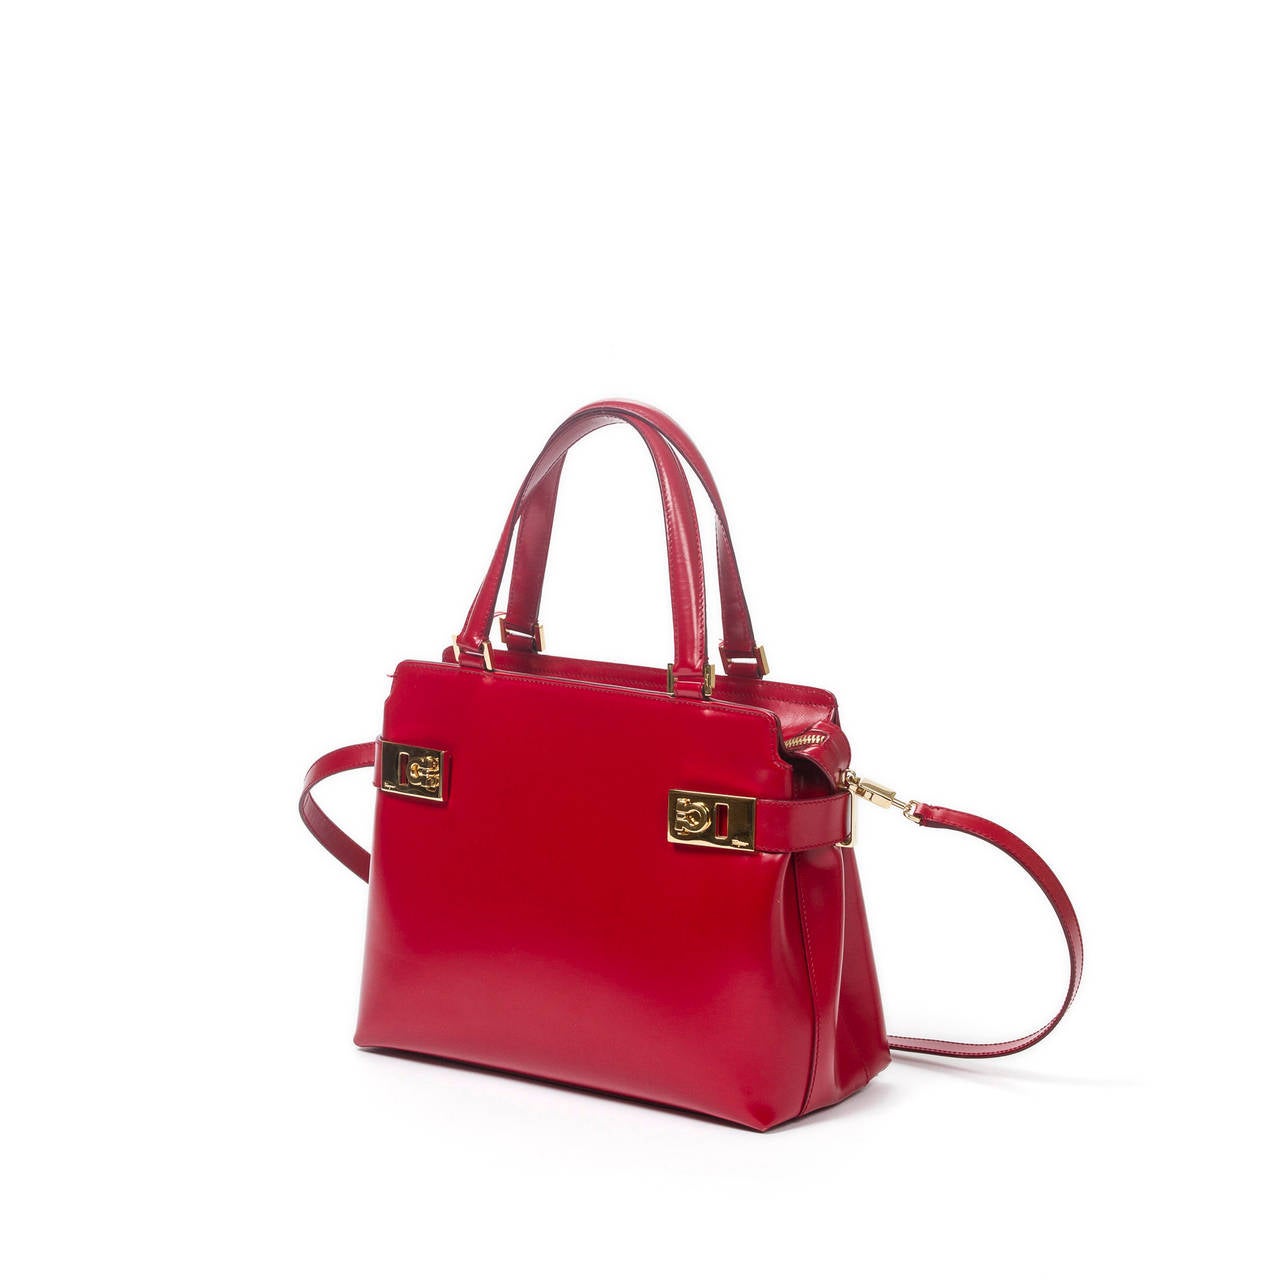 Ferragamo Handbag 2way in red leather. Gold tone hardware. Handles and strap in red leather. Lined interior in black canvas. Excellent condition.